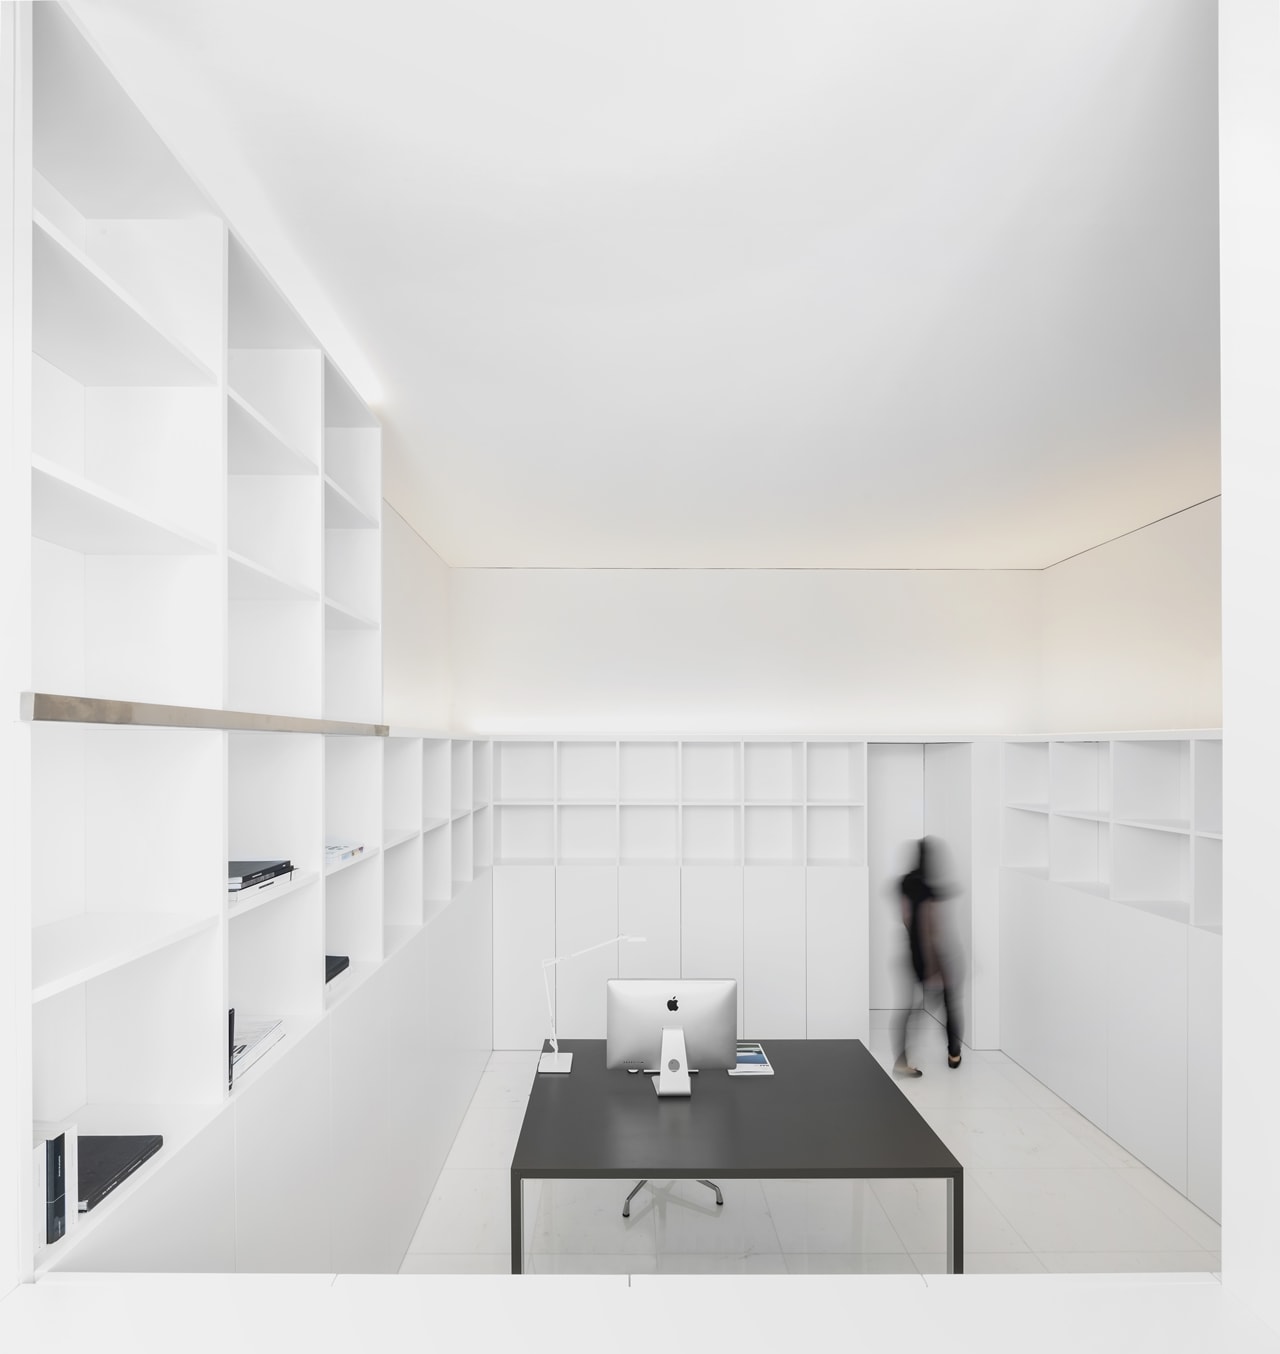 Minimalist home office in minimalist house designed by Fran Silvestre Architects